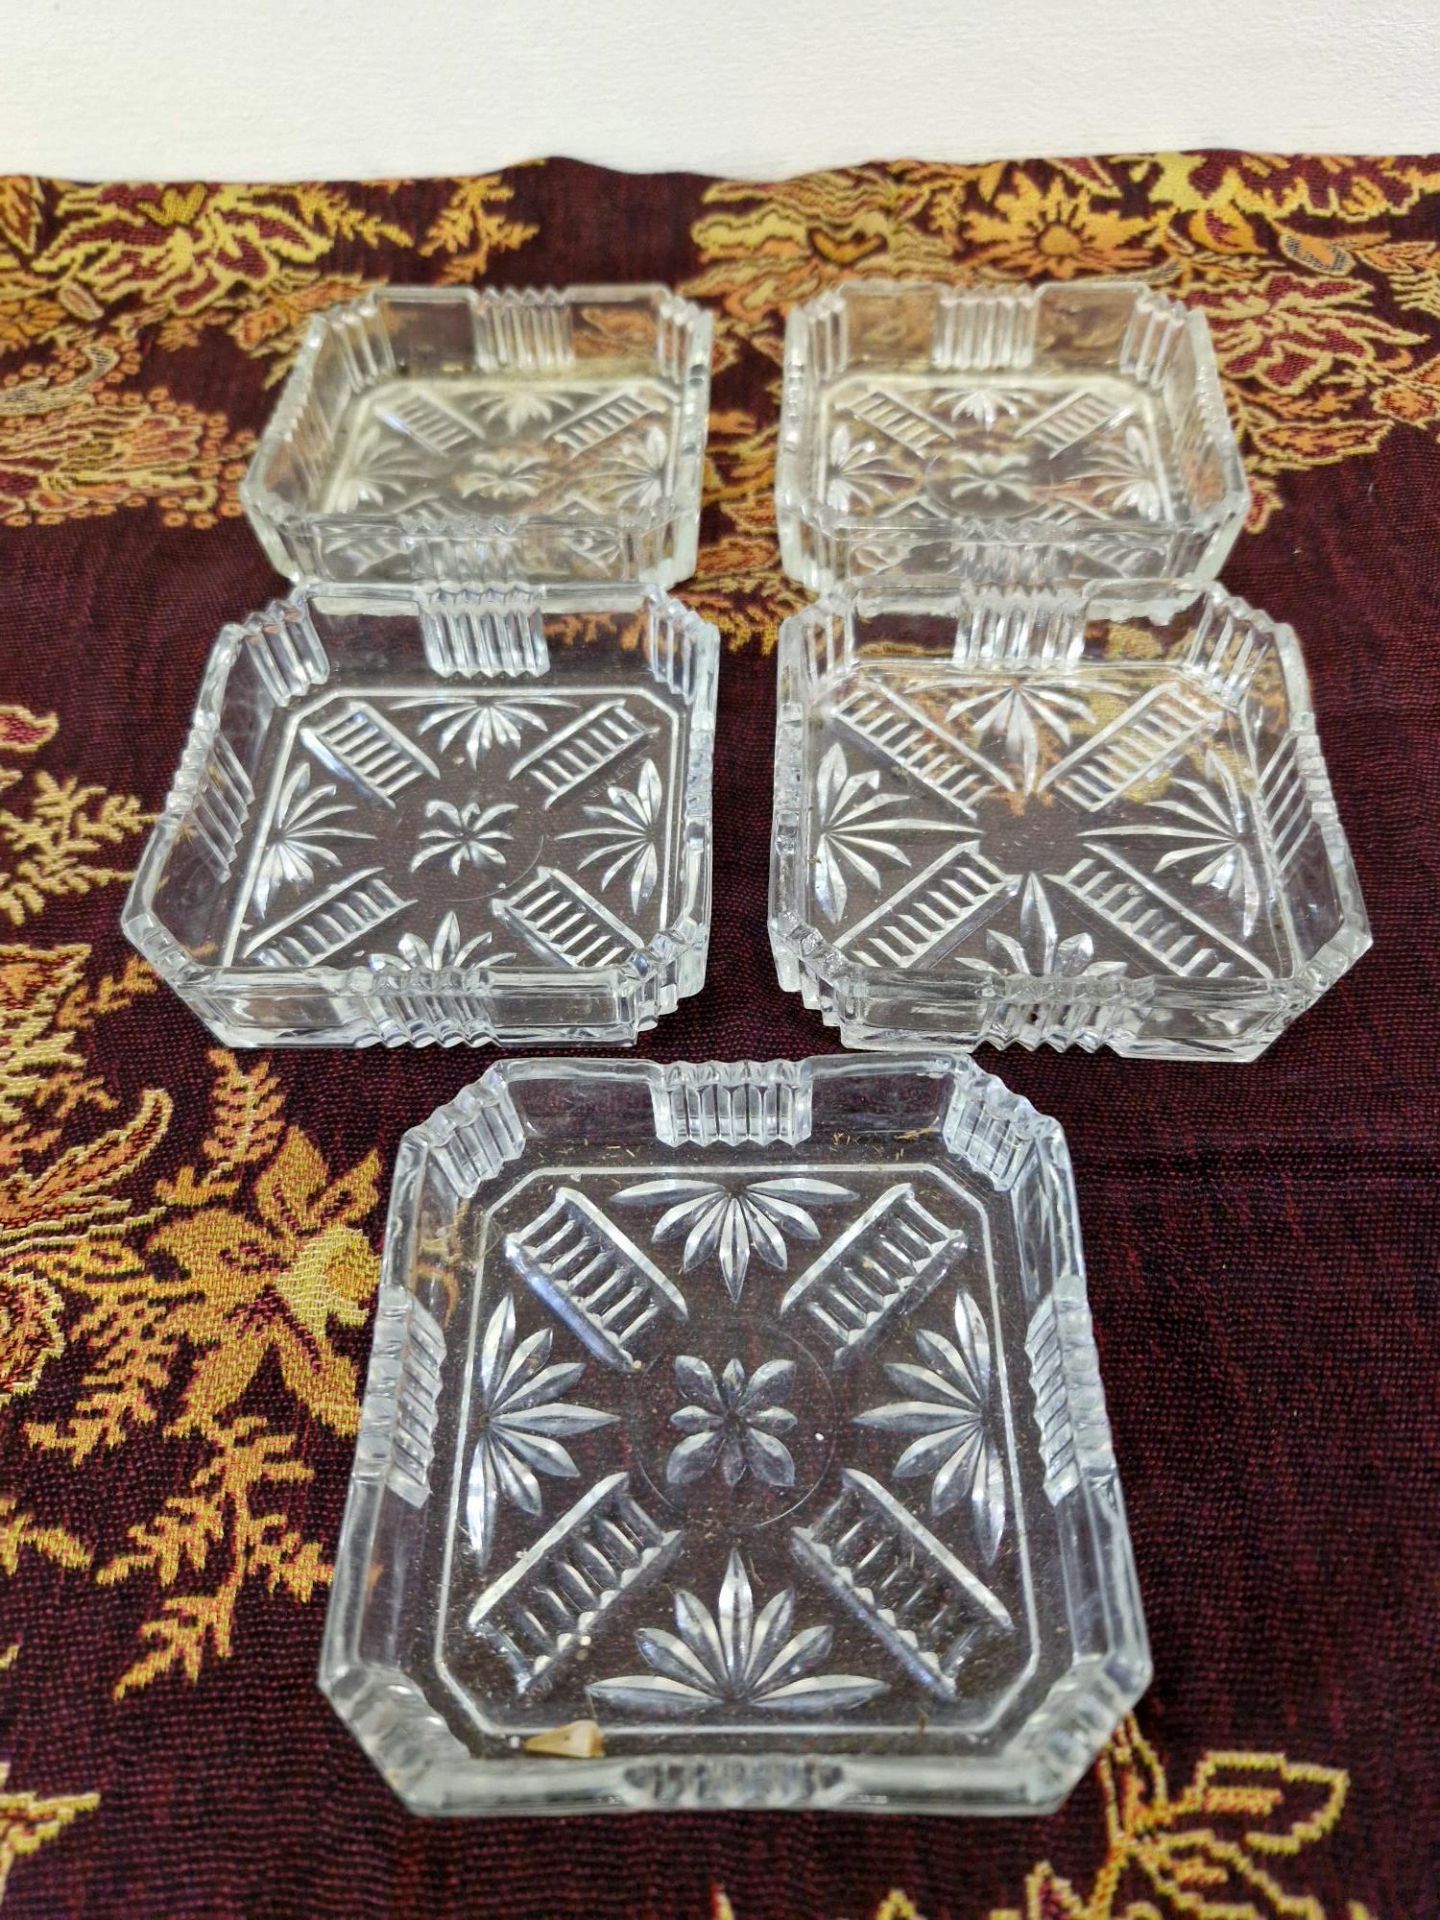 4 glass dishes